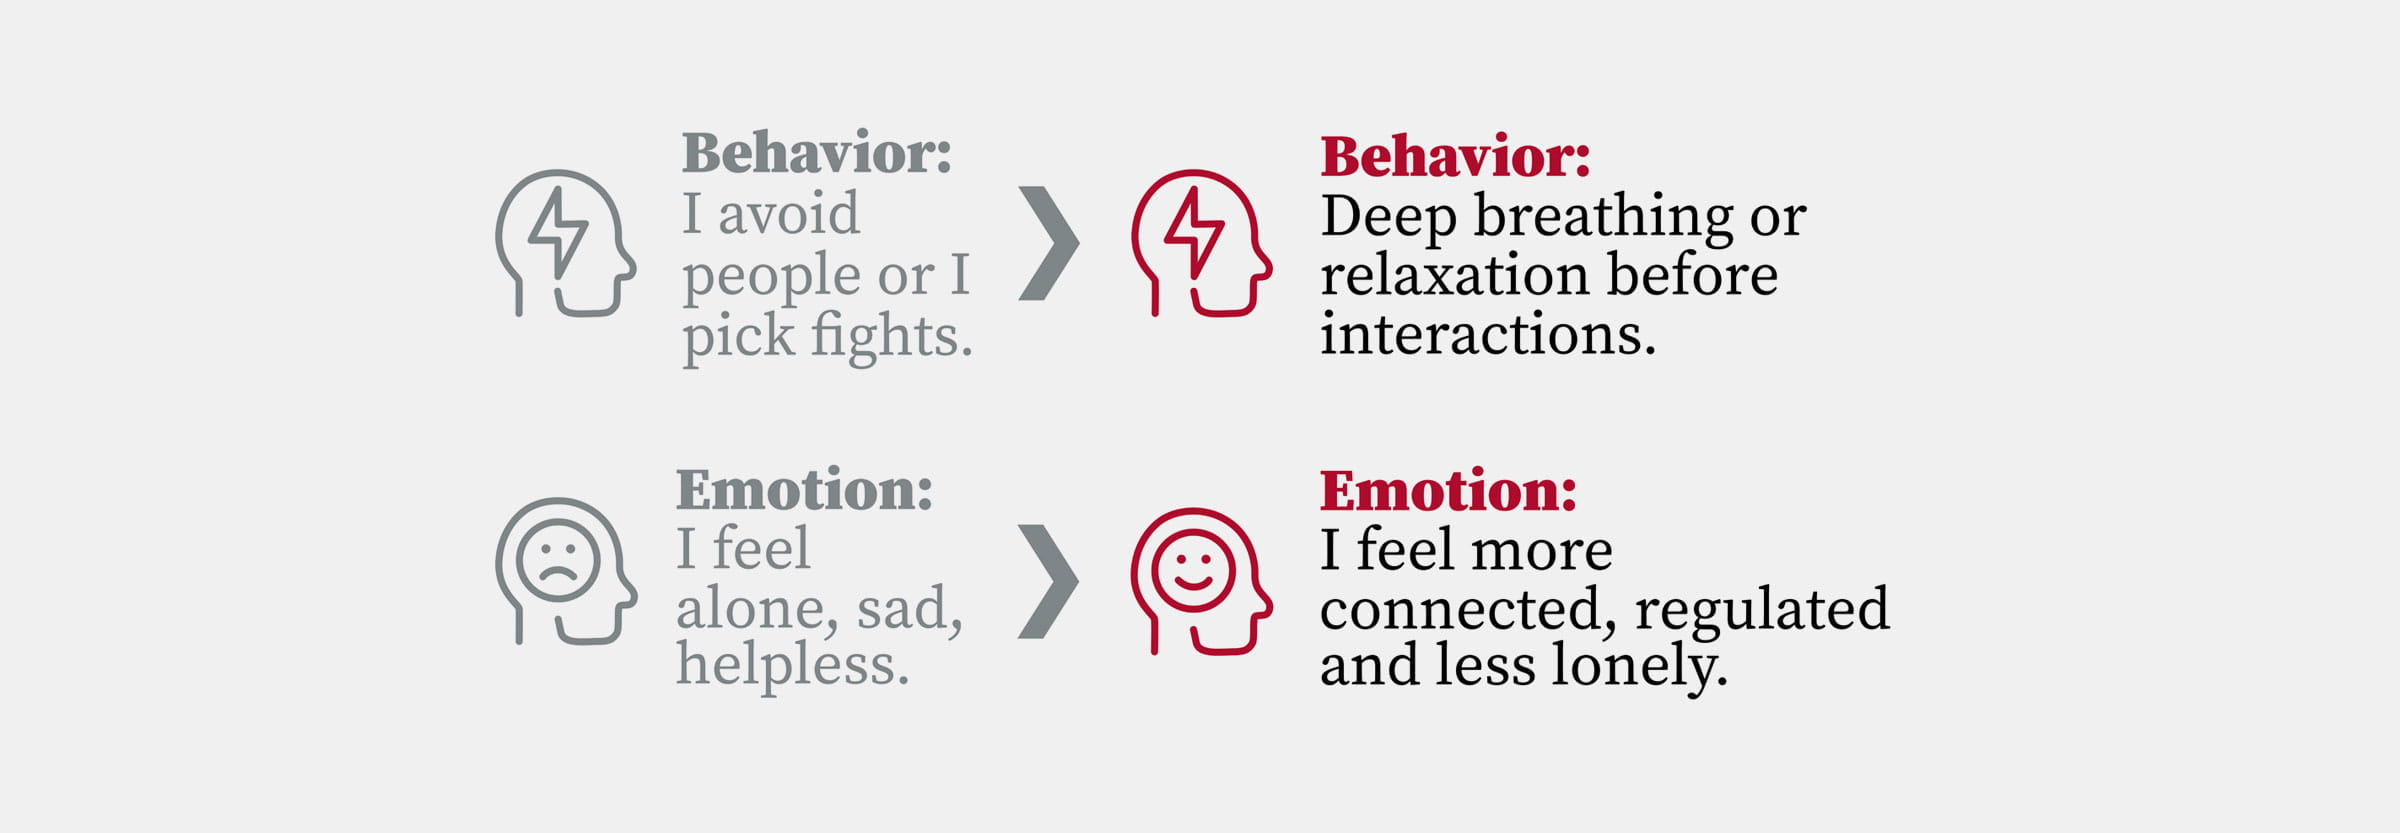 Brief Cognitive Behavioral Therapy (BCBT) explained